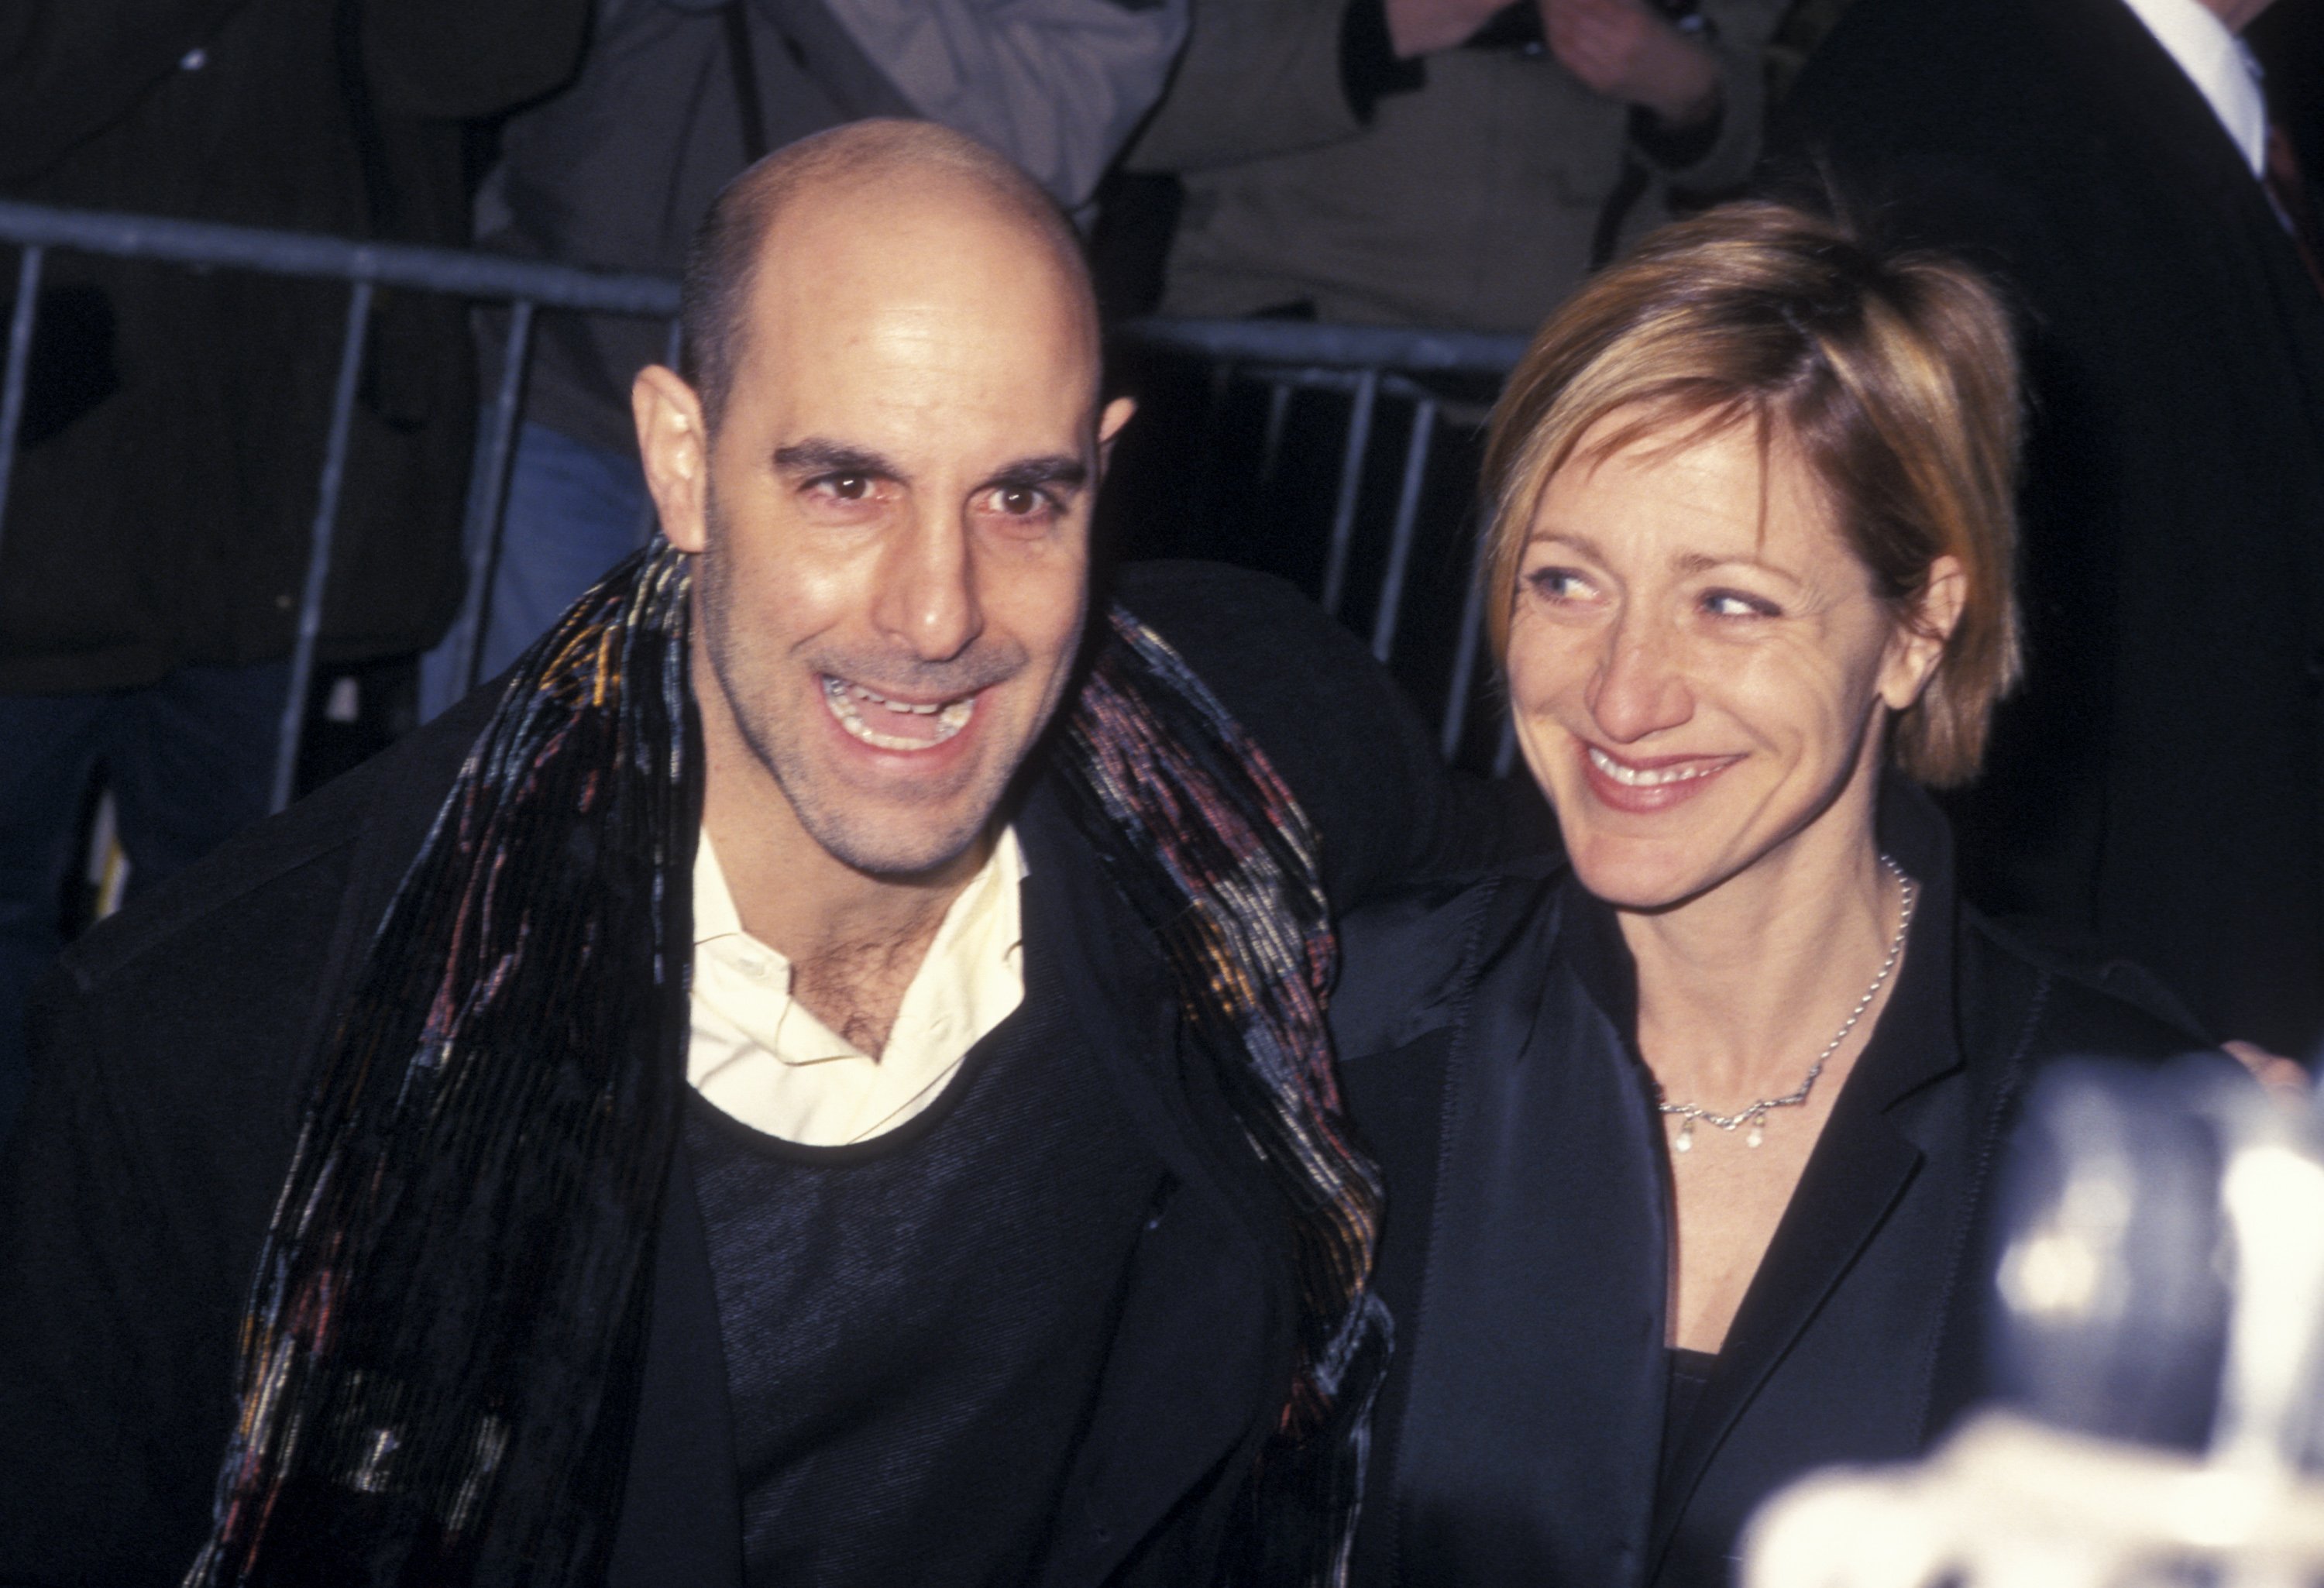 Stanley Tucci and Edie Falco attend the After Party of the New York premiere of "Hours" at Metropolitan Club in New York City, on December 15, 2002. | Source: Getty Images